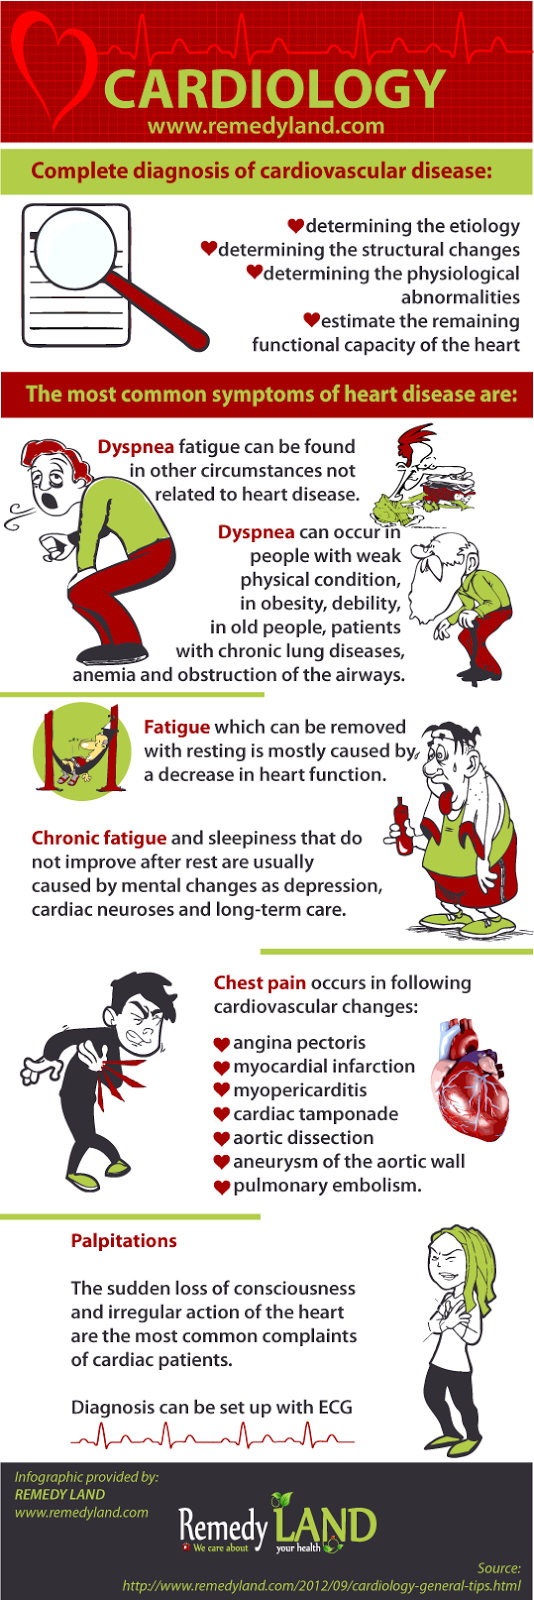 Cardiology General Tips Infographic, dyspnea, fatigue, chest pain and palpitations